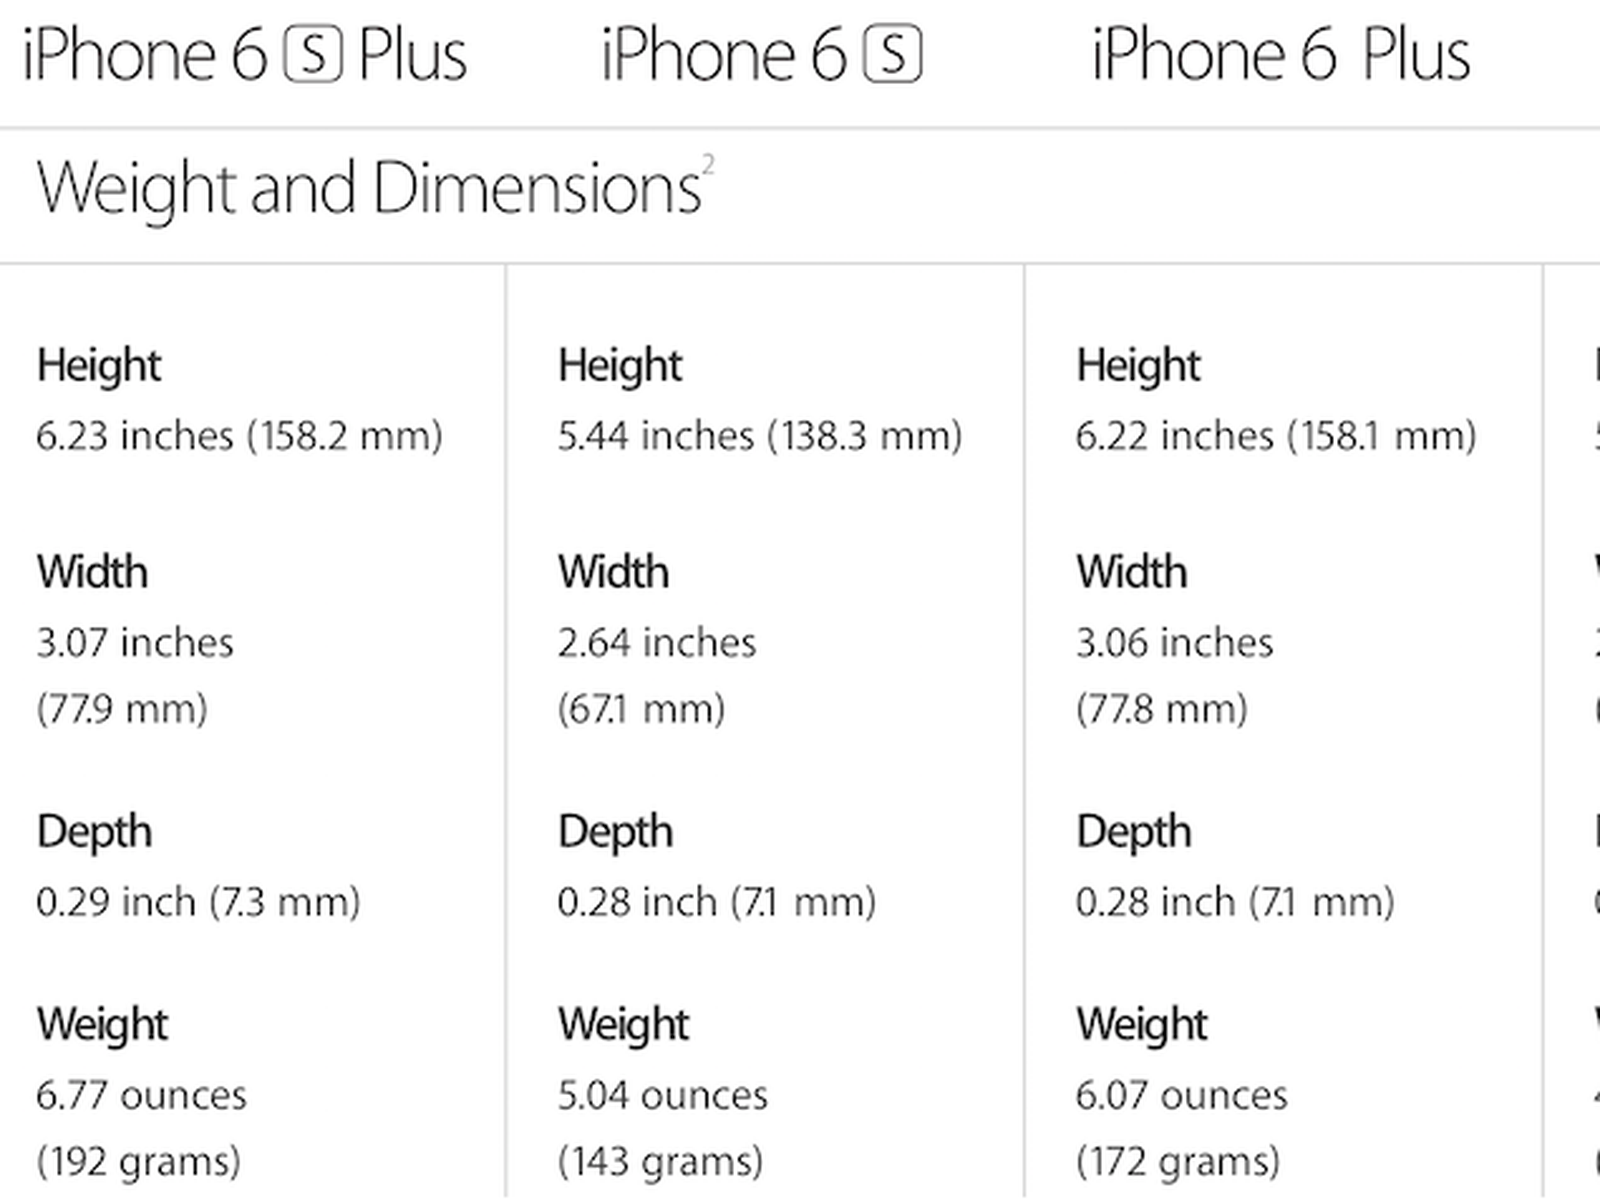 Just How Big Is the iPhone 6 Plus? Here's the Most Helpful Size